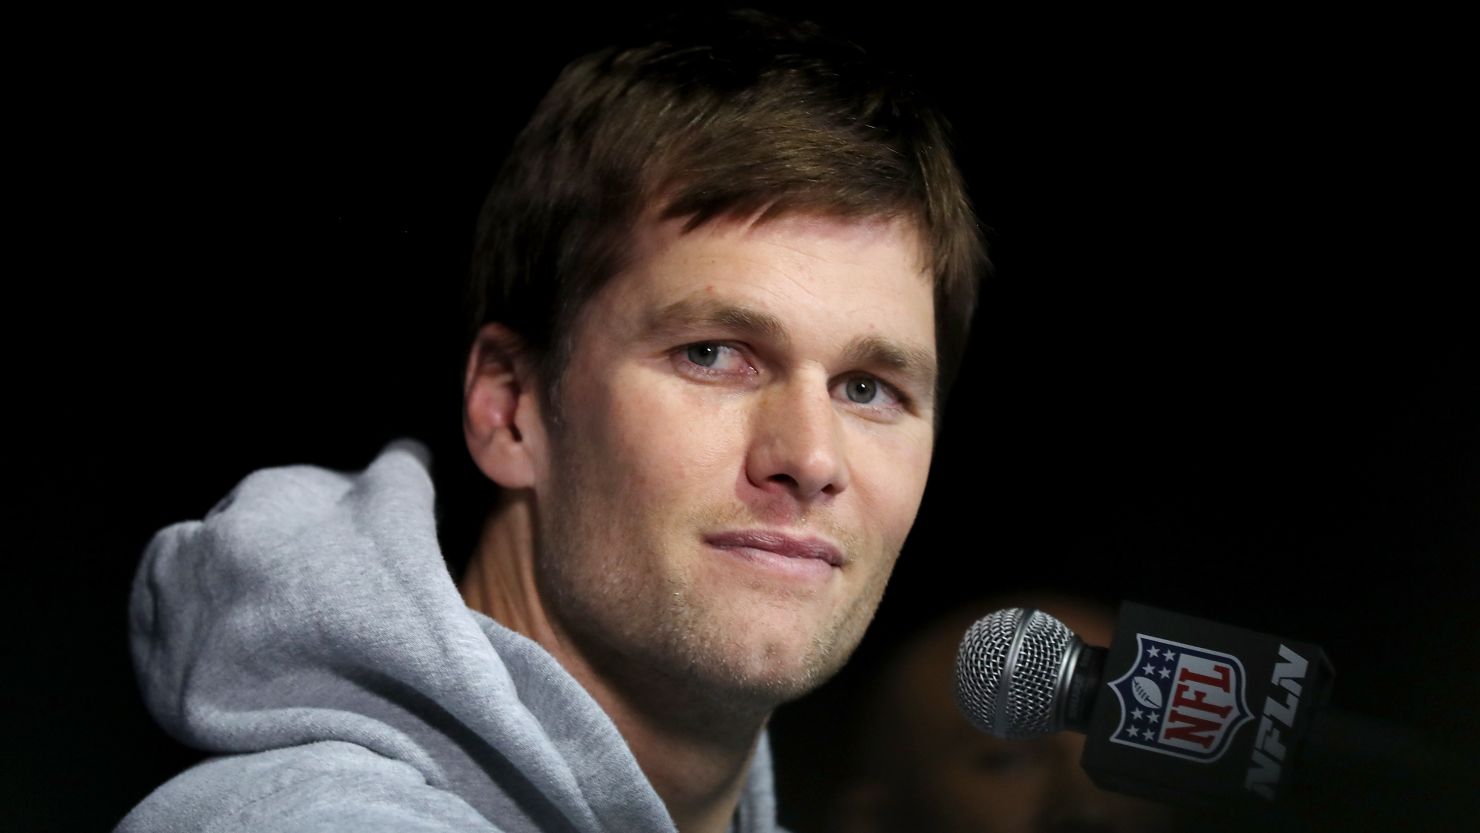 Tom Brady's mother is from Minnesota, and he visited the family farm often as a child.